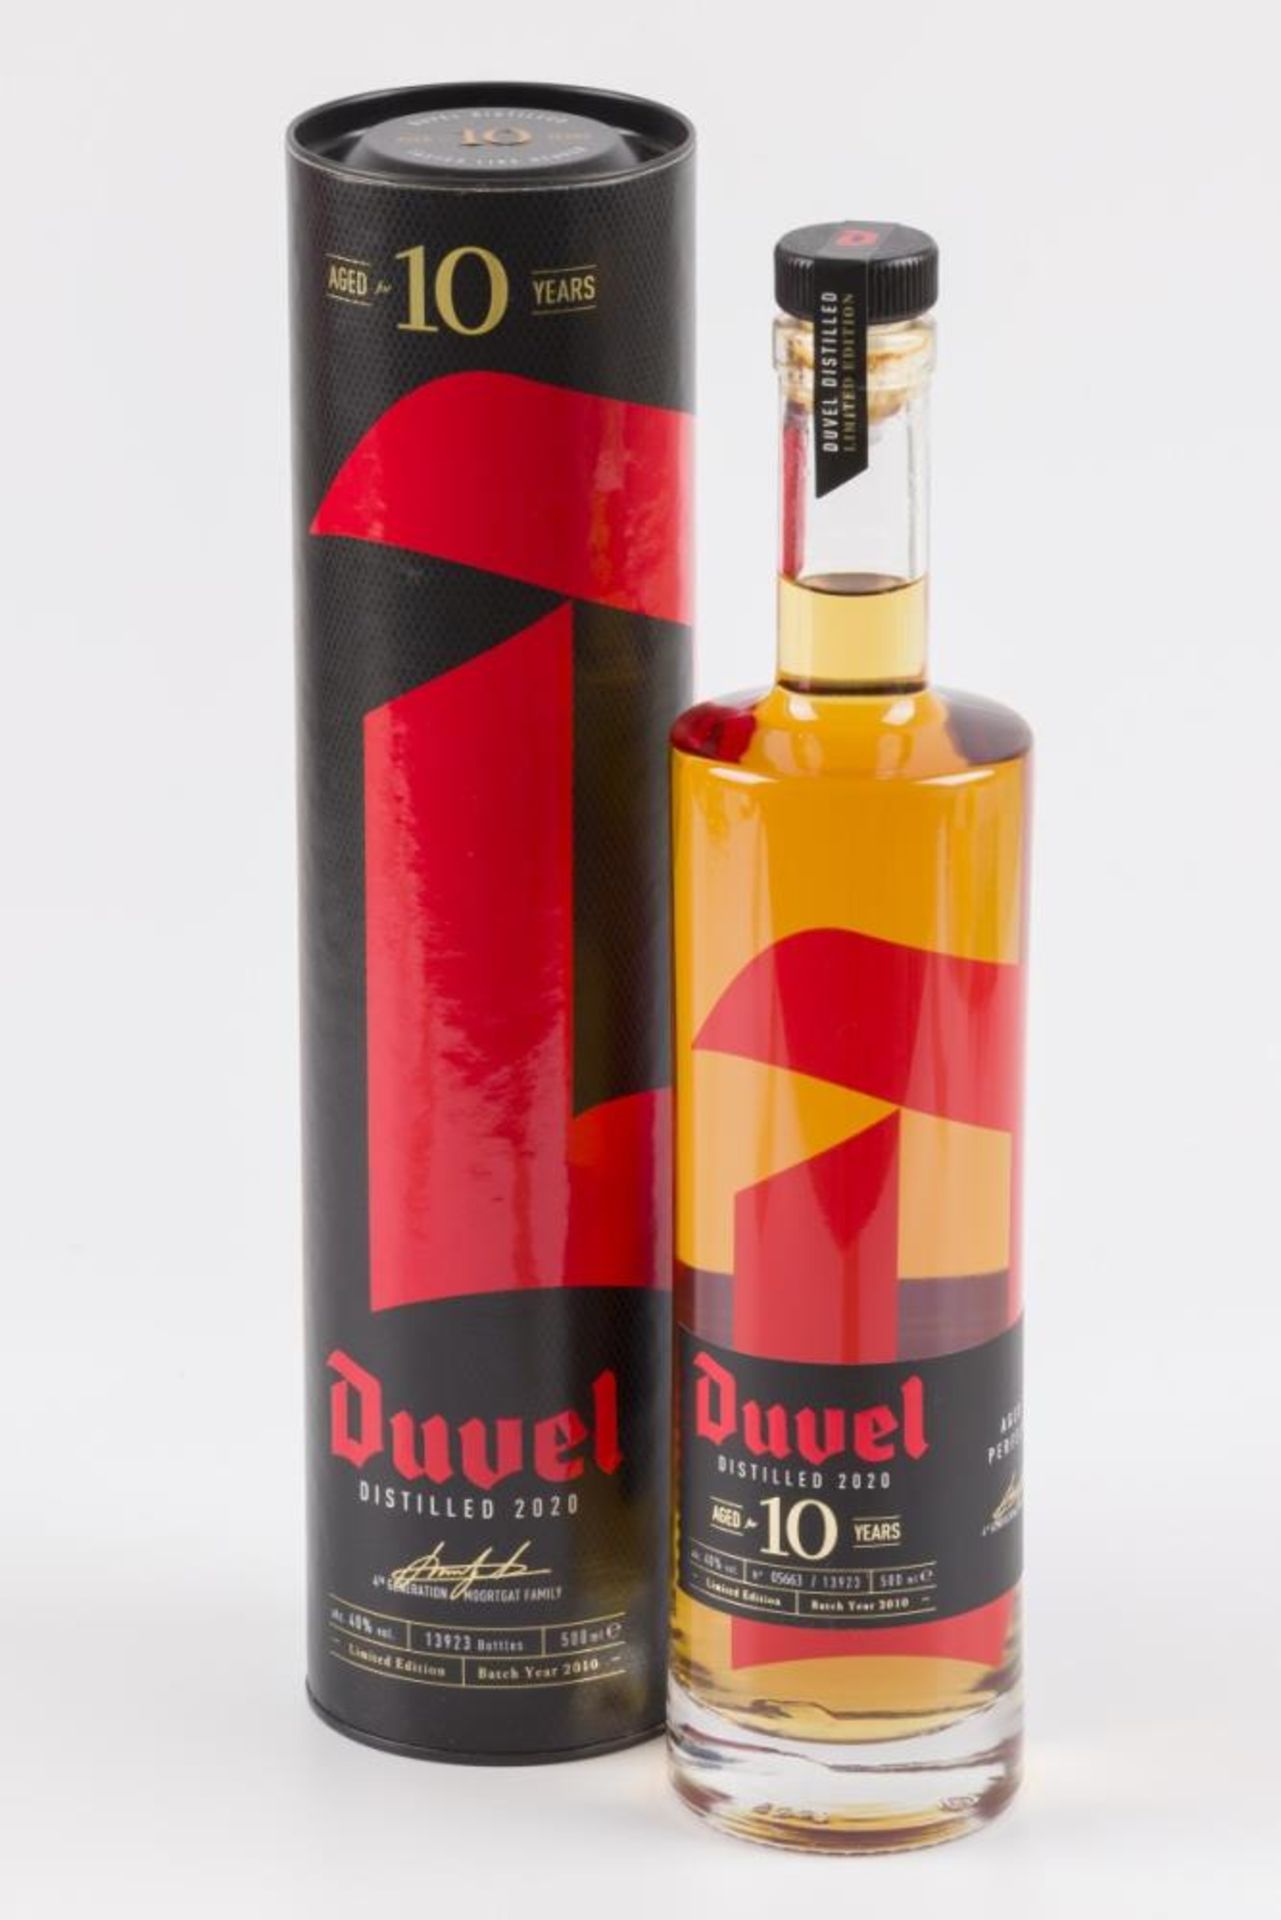 Duvel 10 years old Distilled Limited Edition 2020 - 50cl - Image 2 of 2